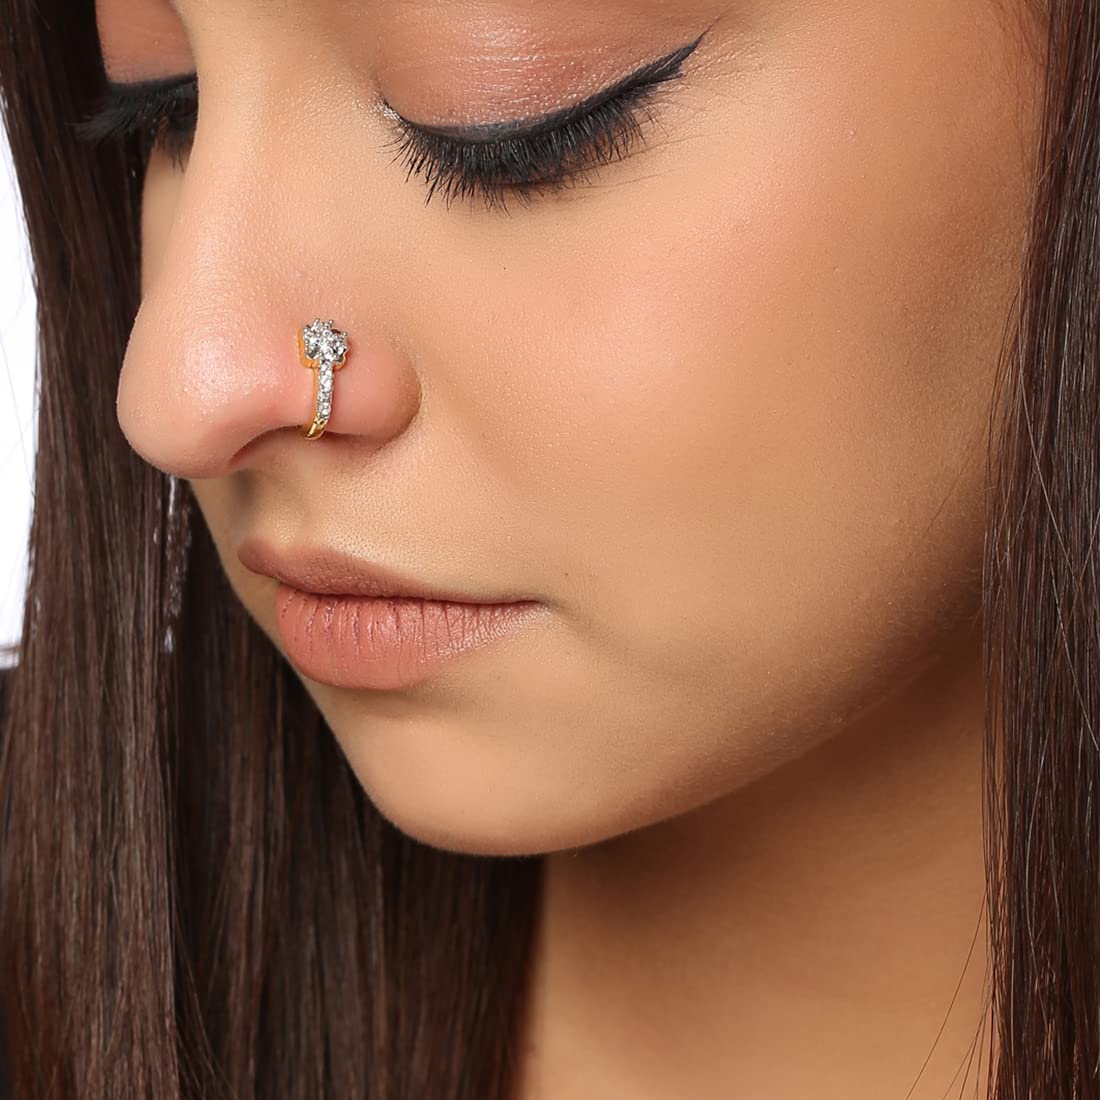 Nose Rings: Meanings, History & Significance | Jewelry Auctioned